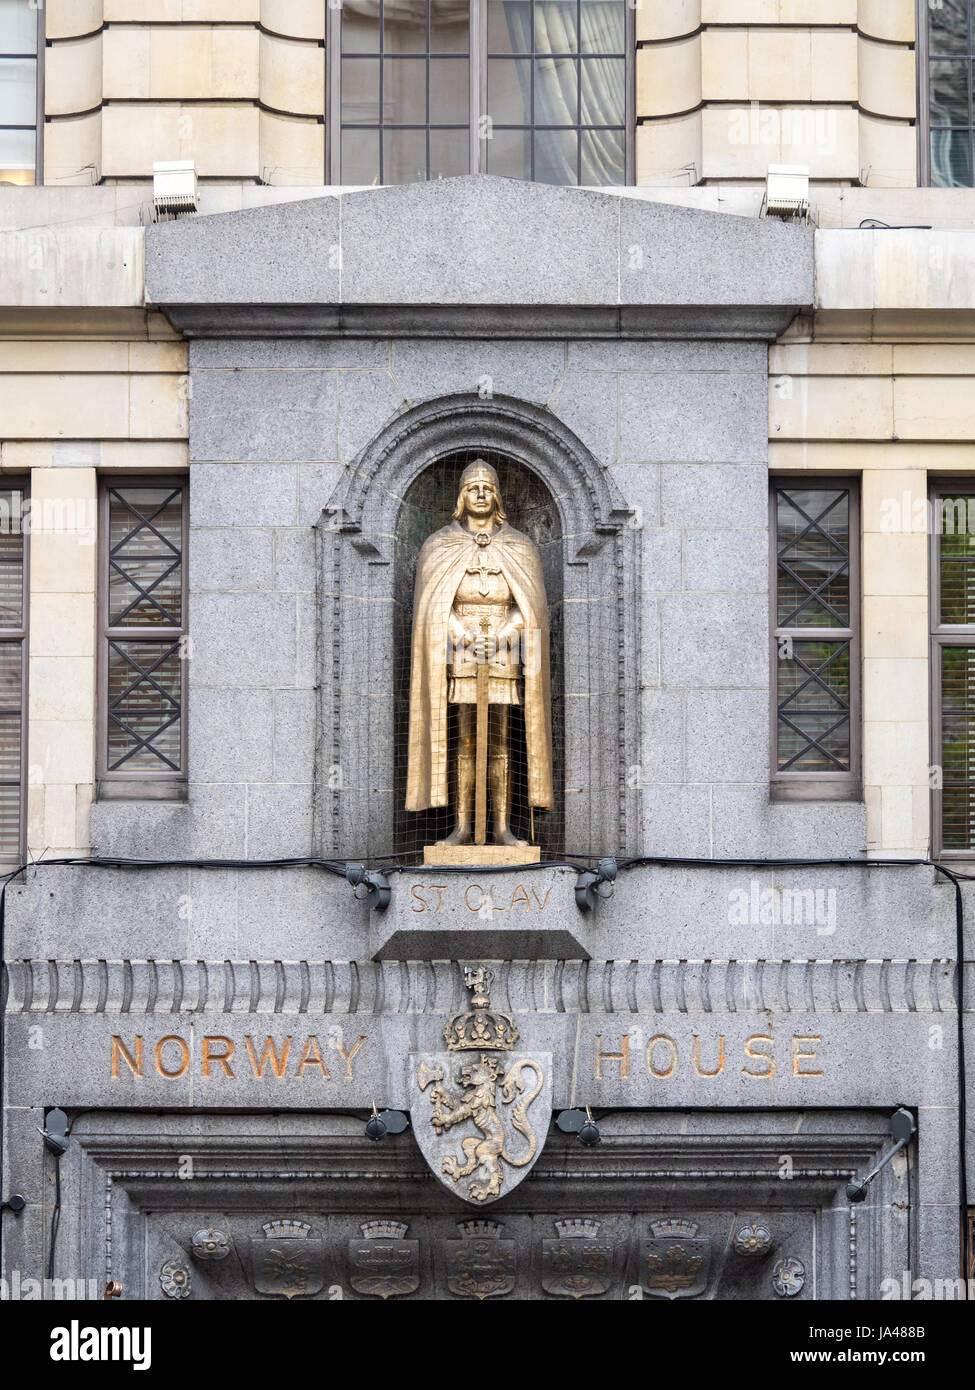 Statue on Norway House in Cockspur Street in Central London, nr Trafalgar Square. It formerly housed the Norwegian Embassy but is now mixed offices Stock Photo